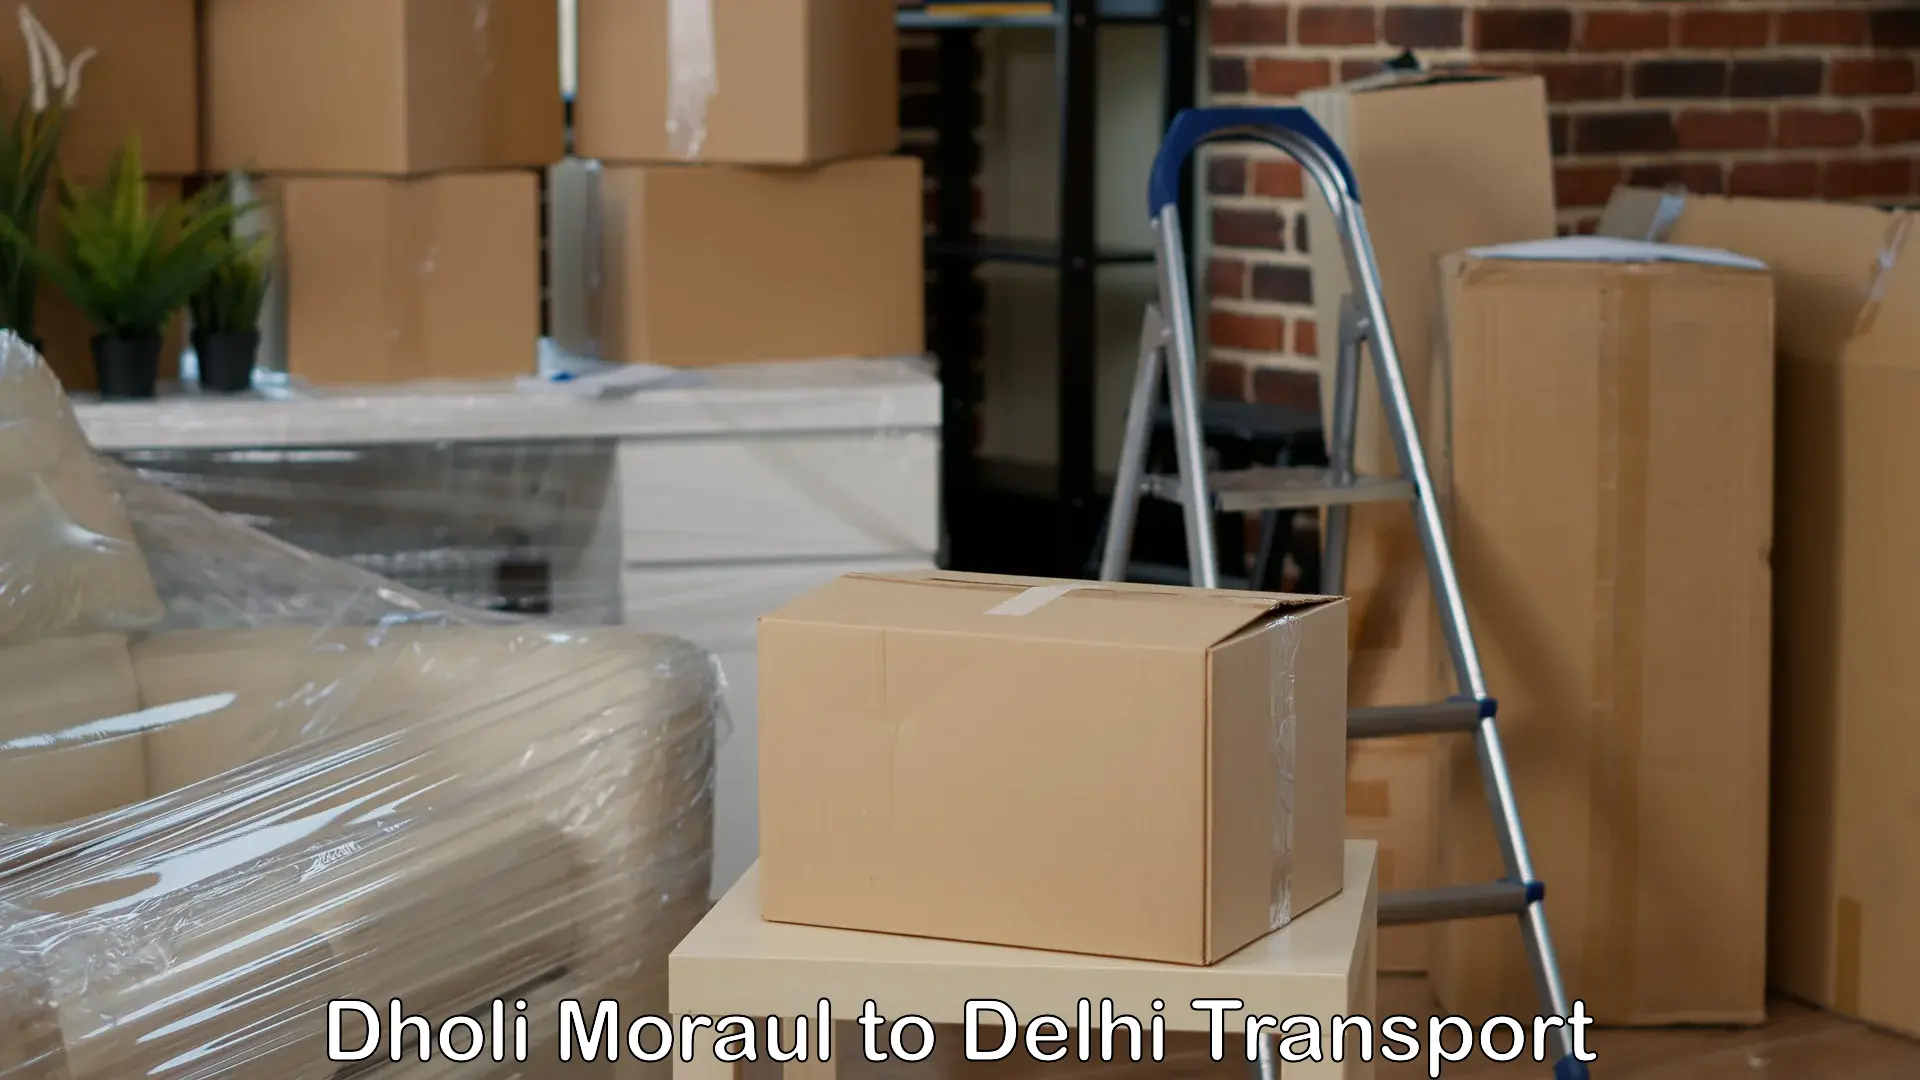 Air cargo transport services Dholi Moraul to Lodhi Road